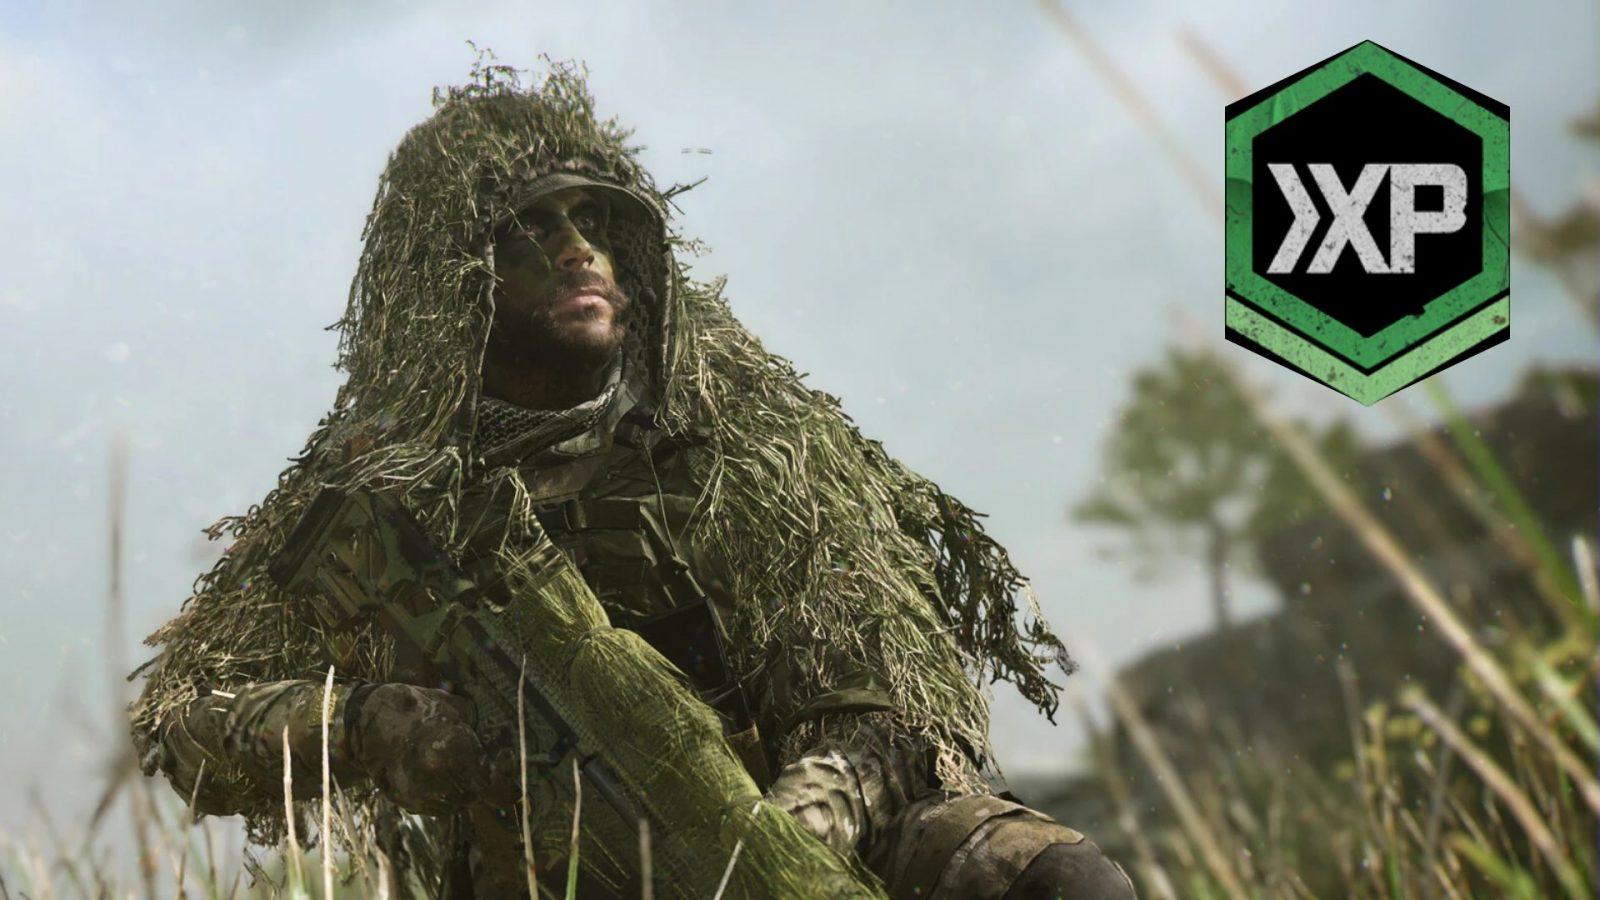 Call of Duty: Modern Warfare Campaign length: What is it? - Charlie INTEL